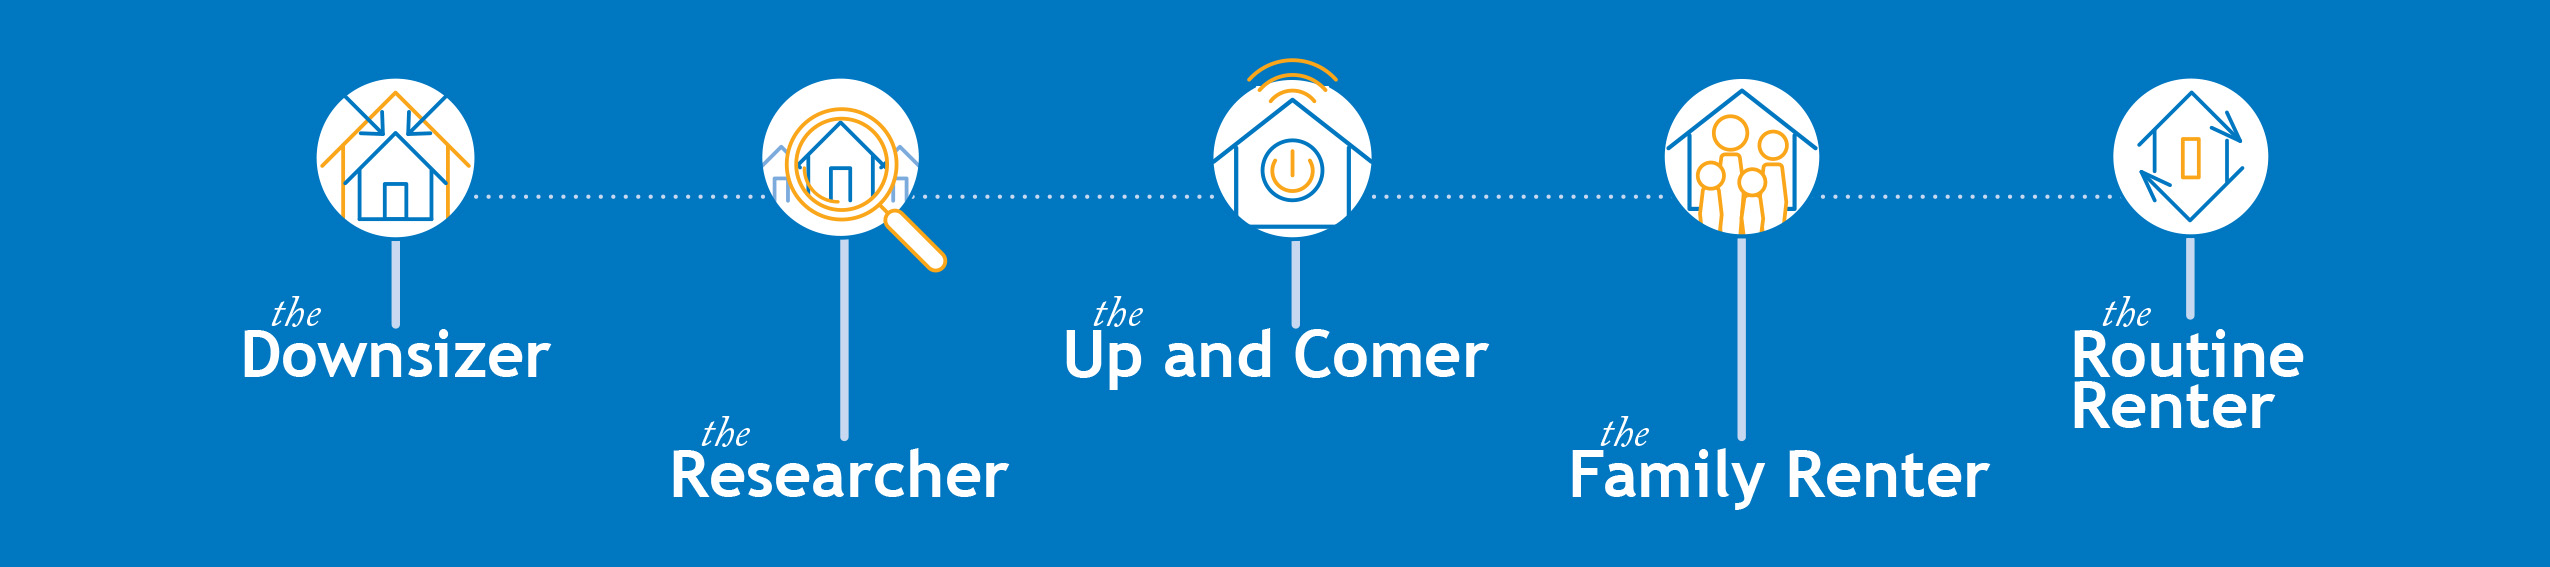 5TypesOfResdients. The Downsizer, the Researcher, the Up and Comer, the Family Renter, the Routine Renter.